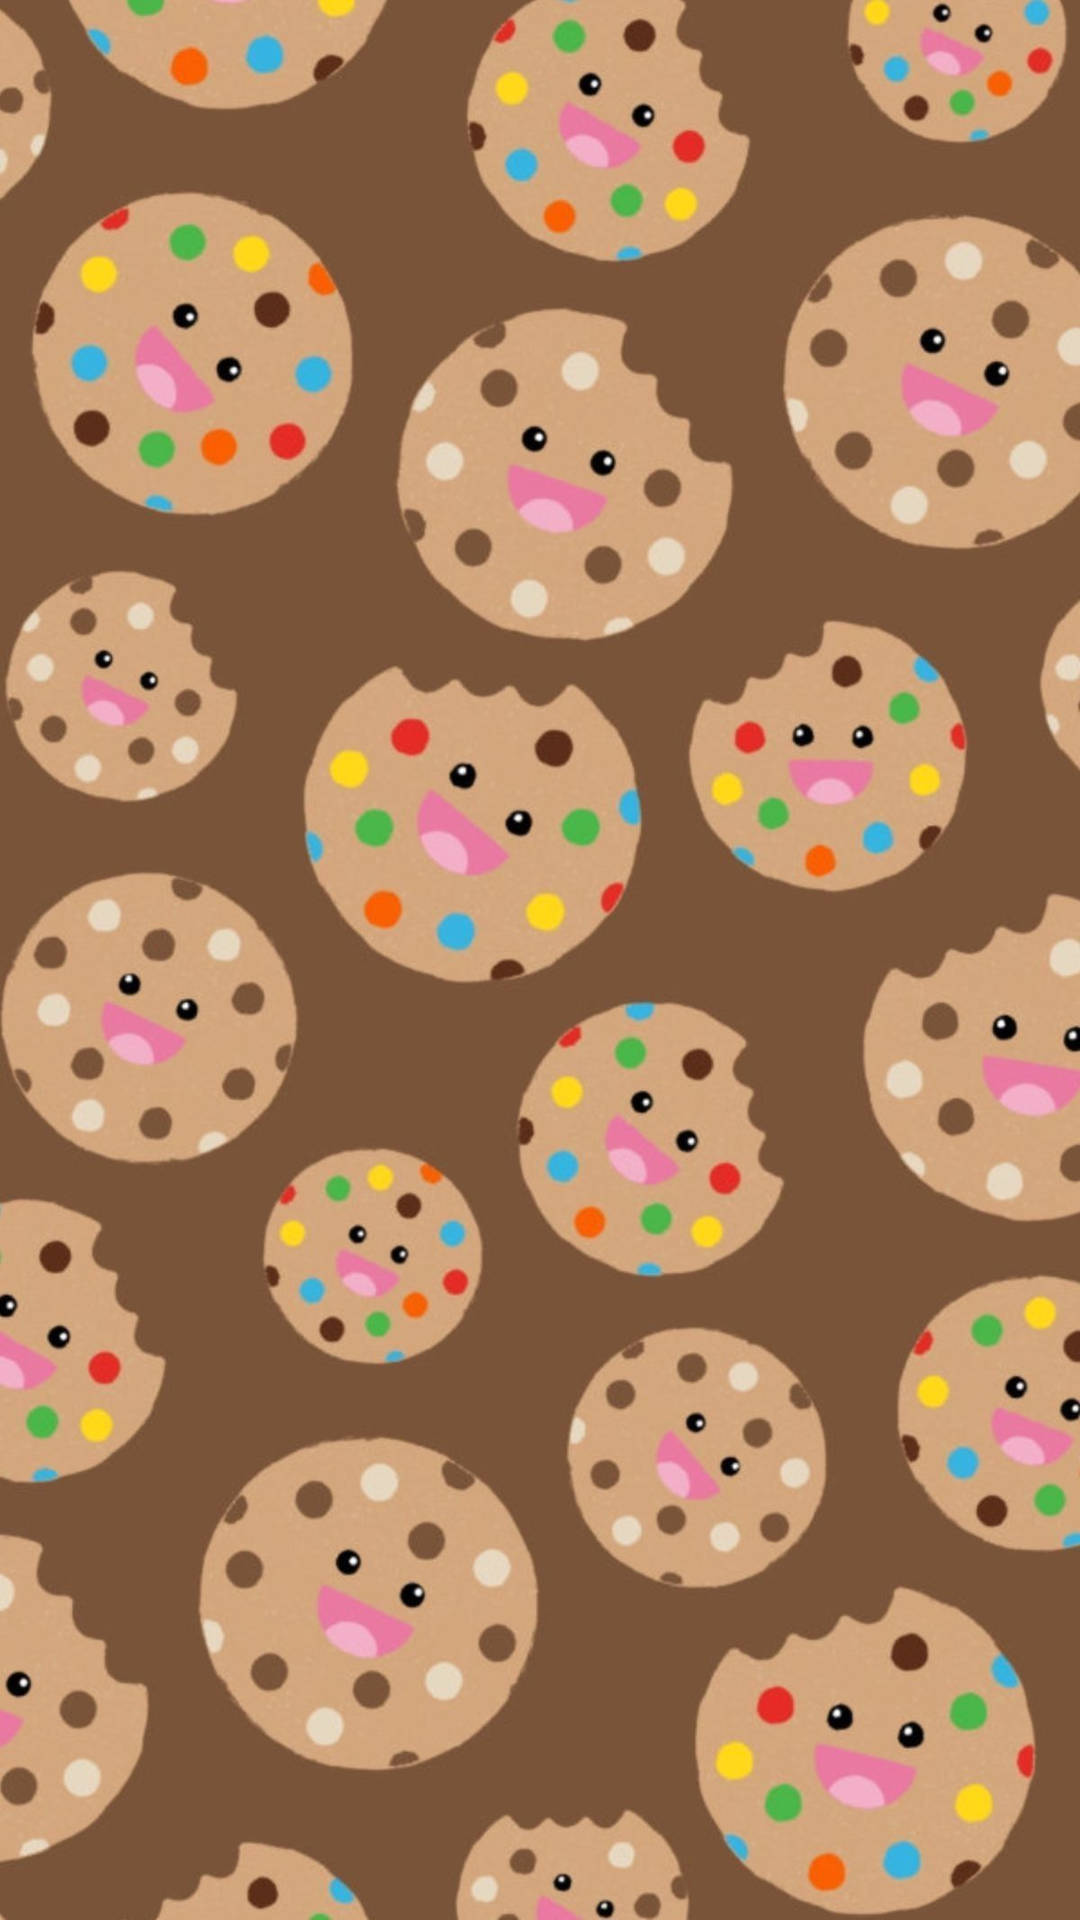 "Sweet Delight: Artistic Cookie Illustration for iPhone" Wallpaper